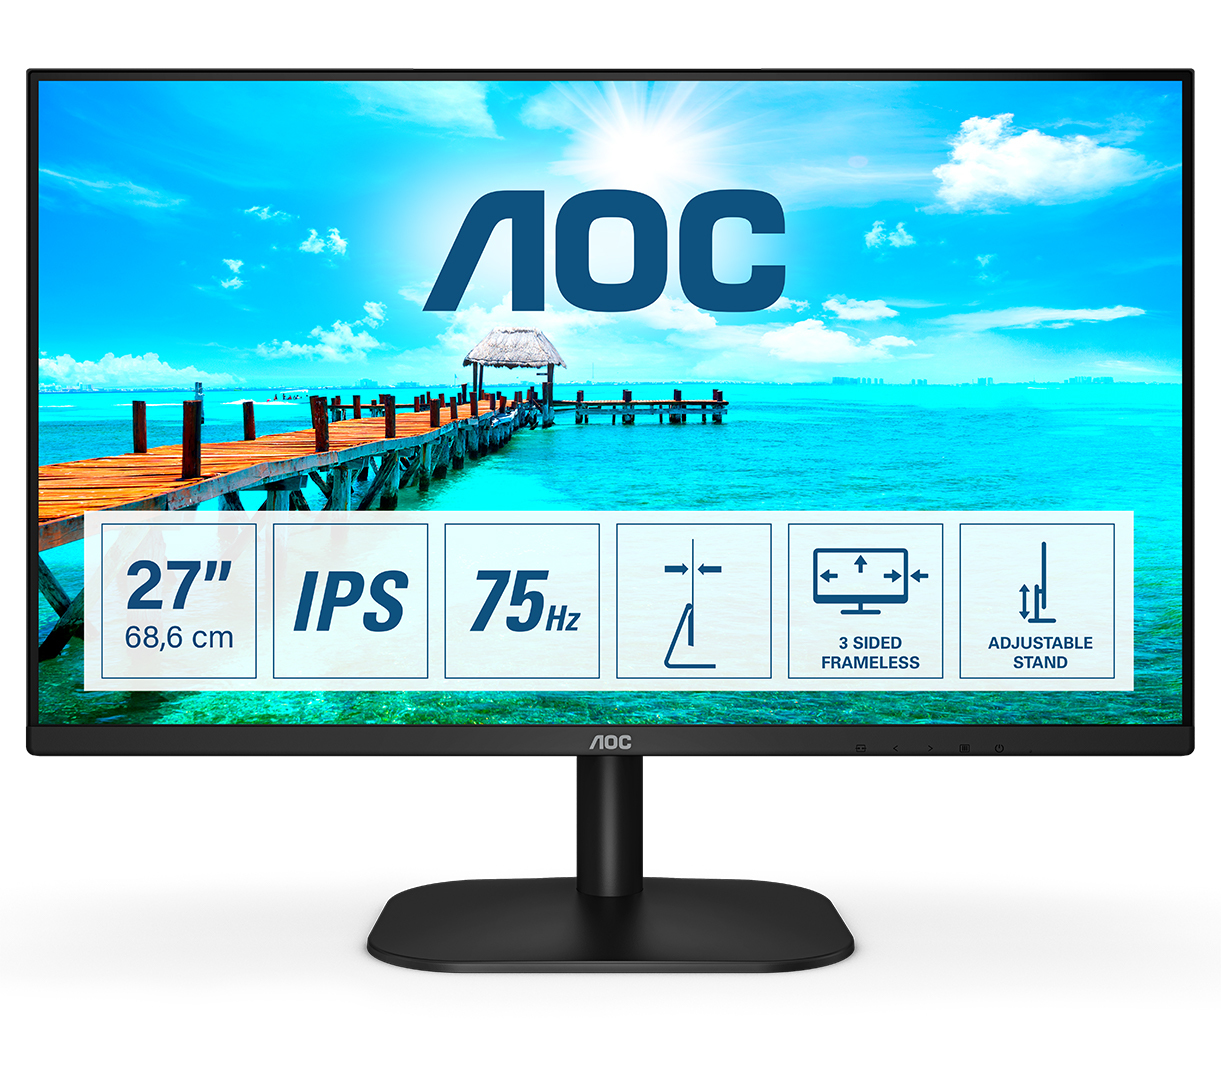 Screen size (inch) 27, Panel resolution 1920x1080, Refresh rate 75 Hz, Panel type IPS, HDMI HDMI 1.4 x 1, D-SUB (VGA) 1x